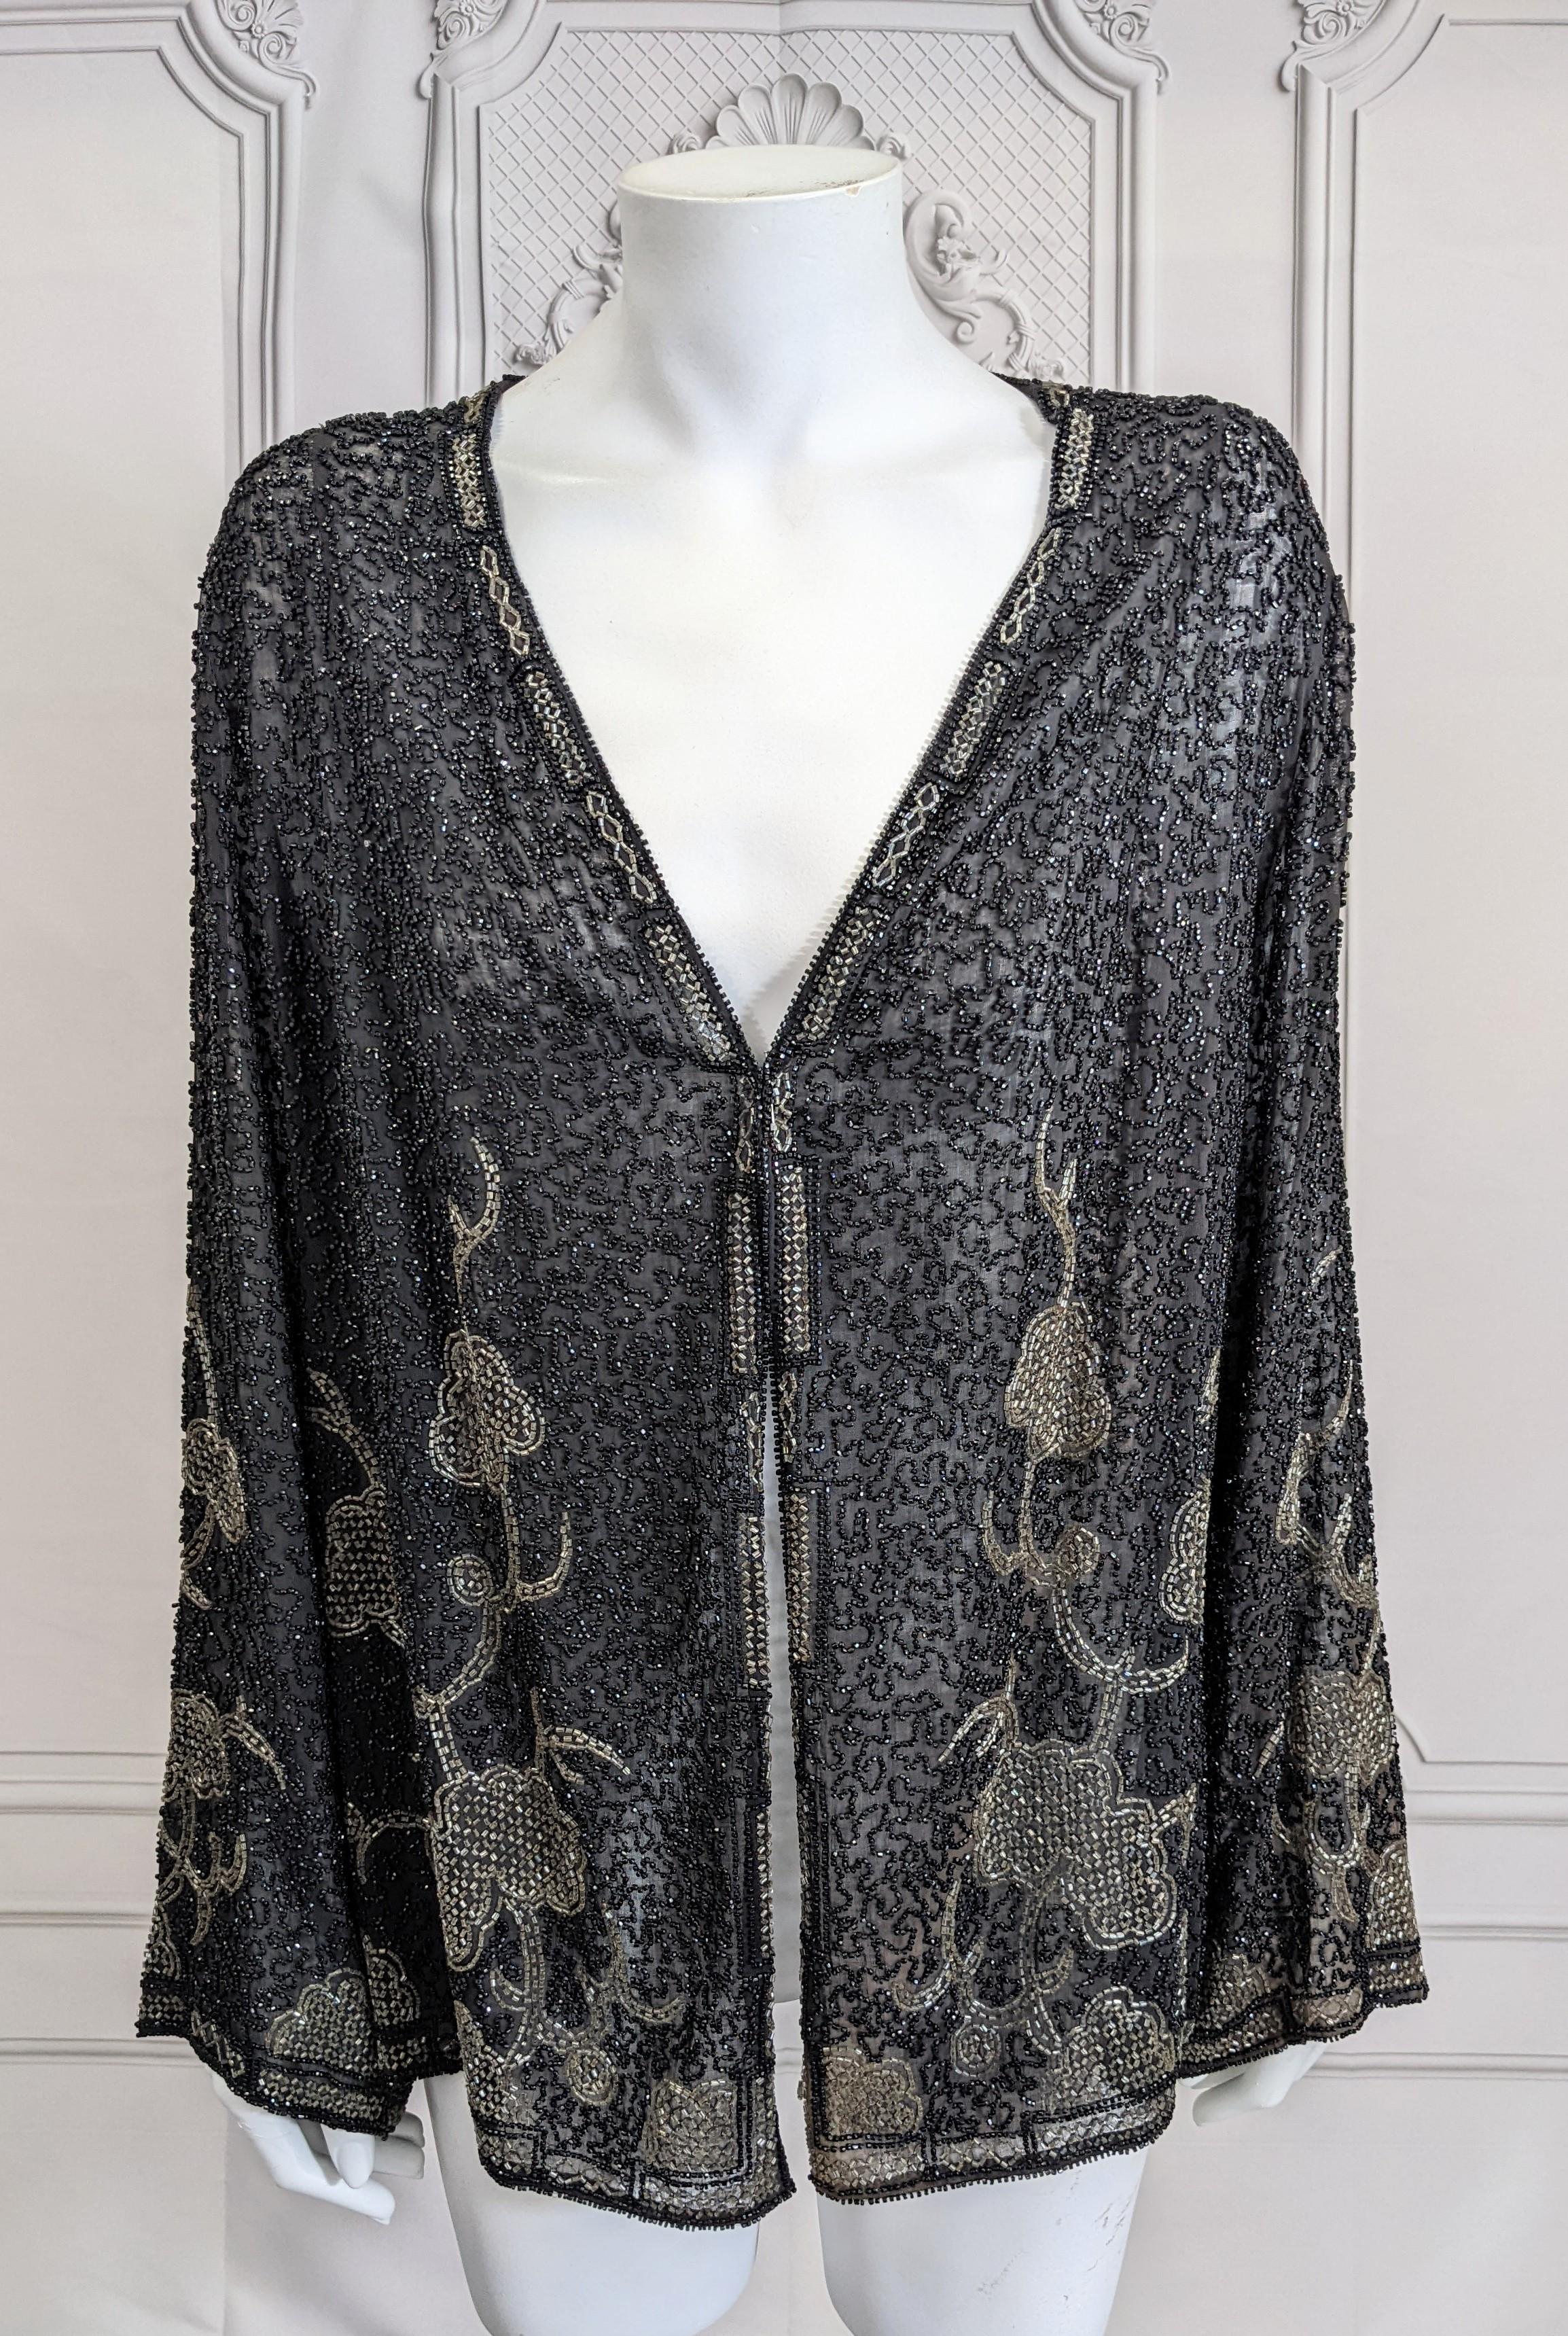 French Art Deco Orientalist cardigan evening jacket from the 1920's. Of black and crystal gray beaded on sturdy black cotton voile.  Beaded in black jet and crystal seed beads in pattern reminiscent of a cormandel screen. No closure, a hook/eye